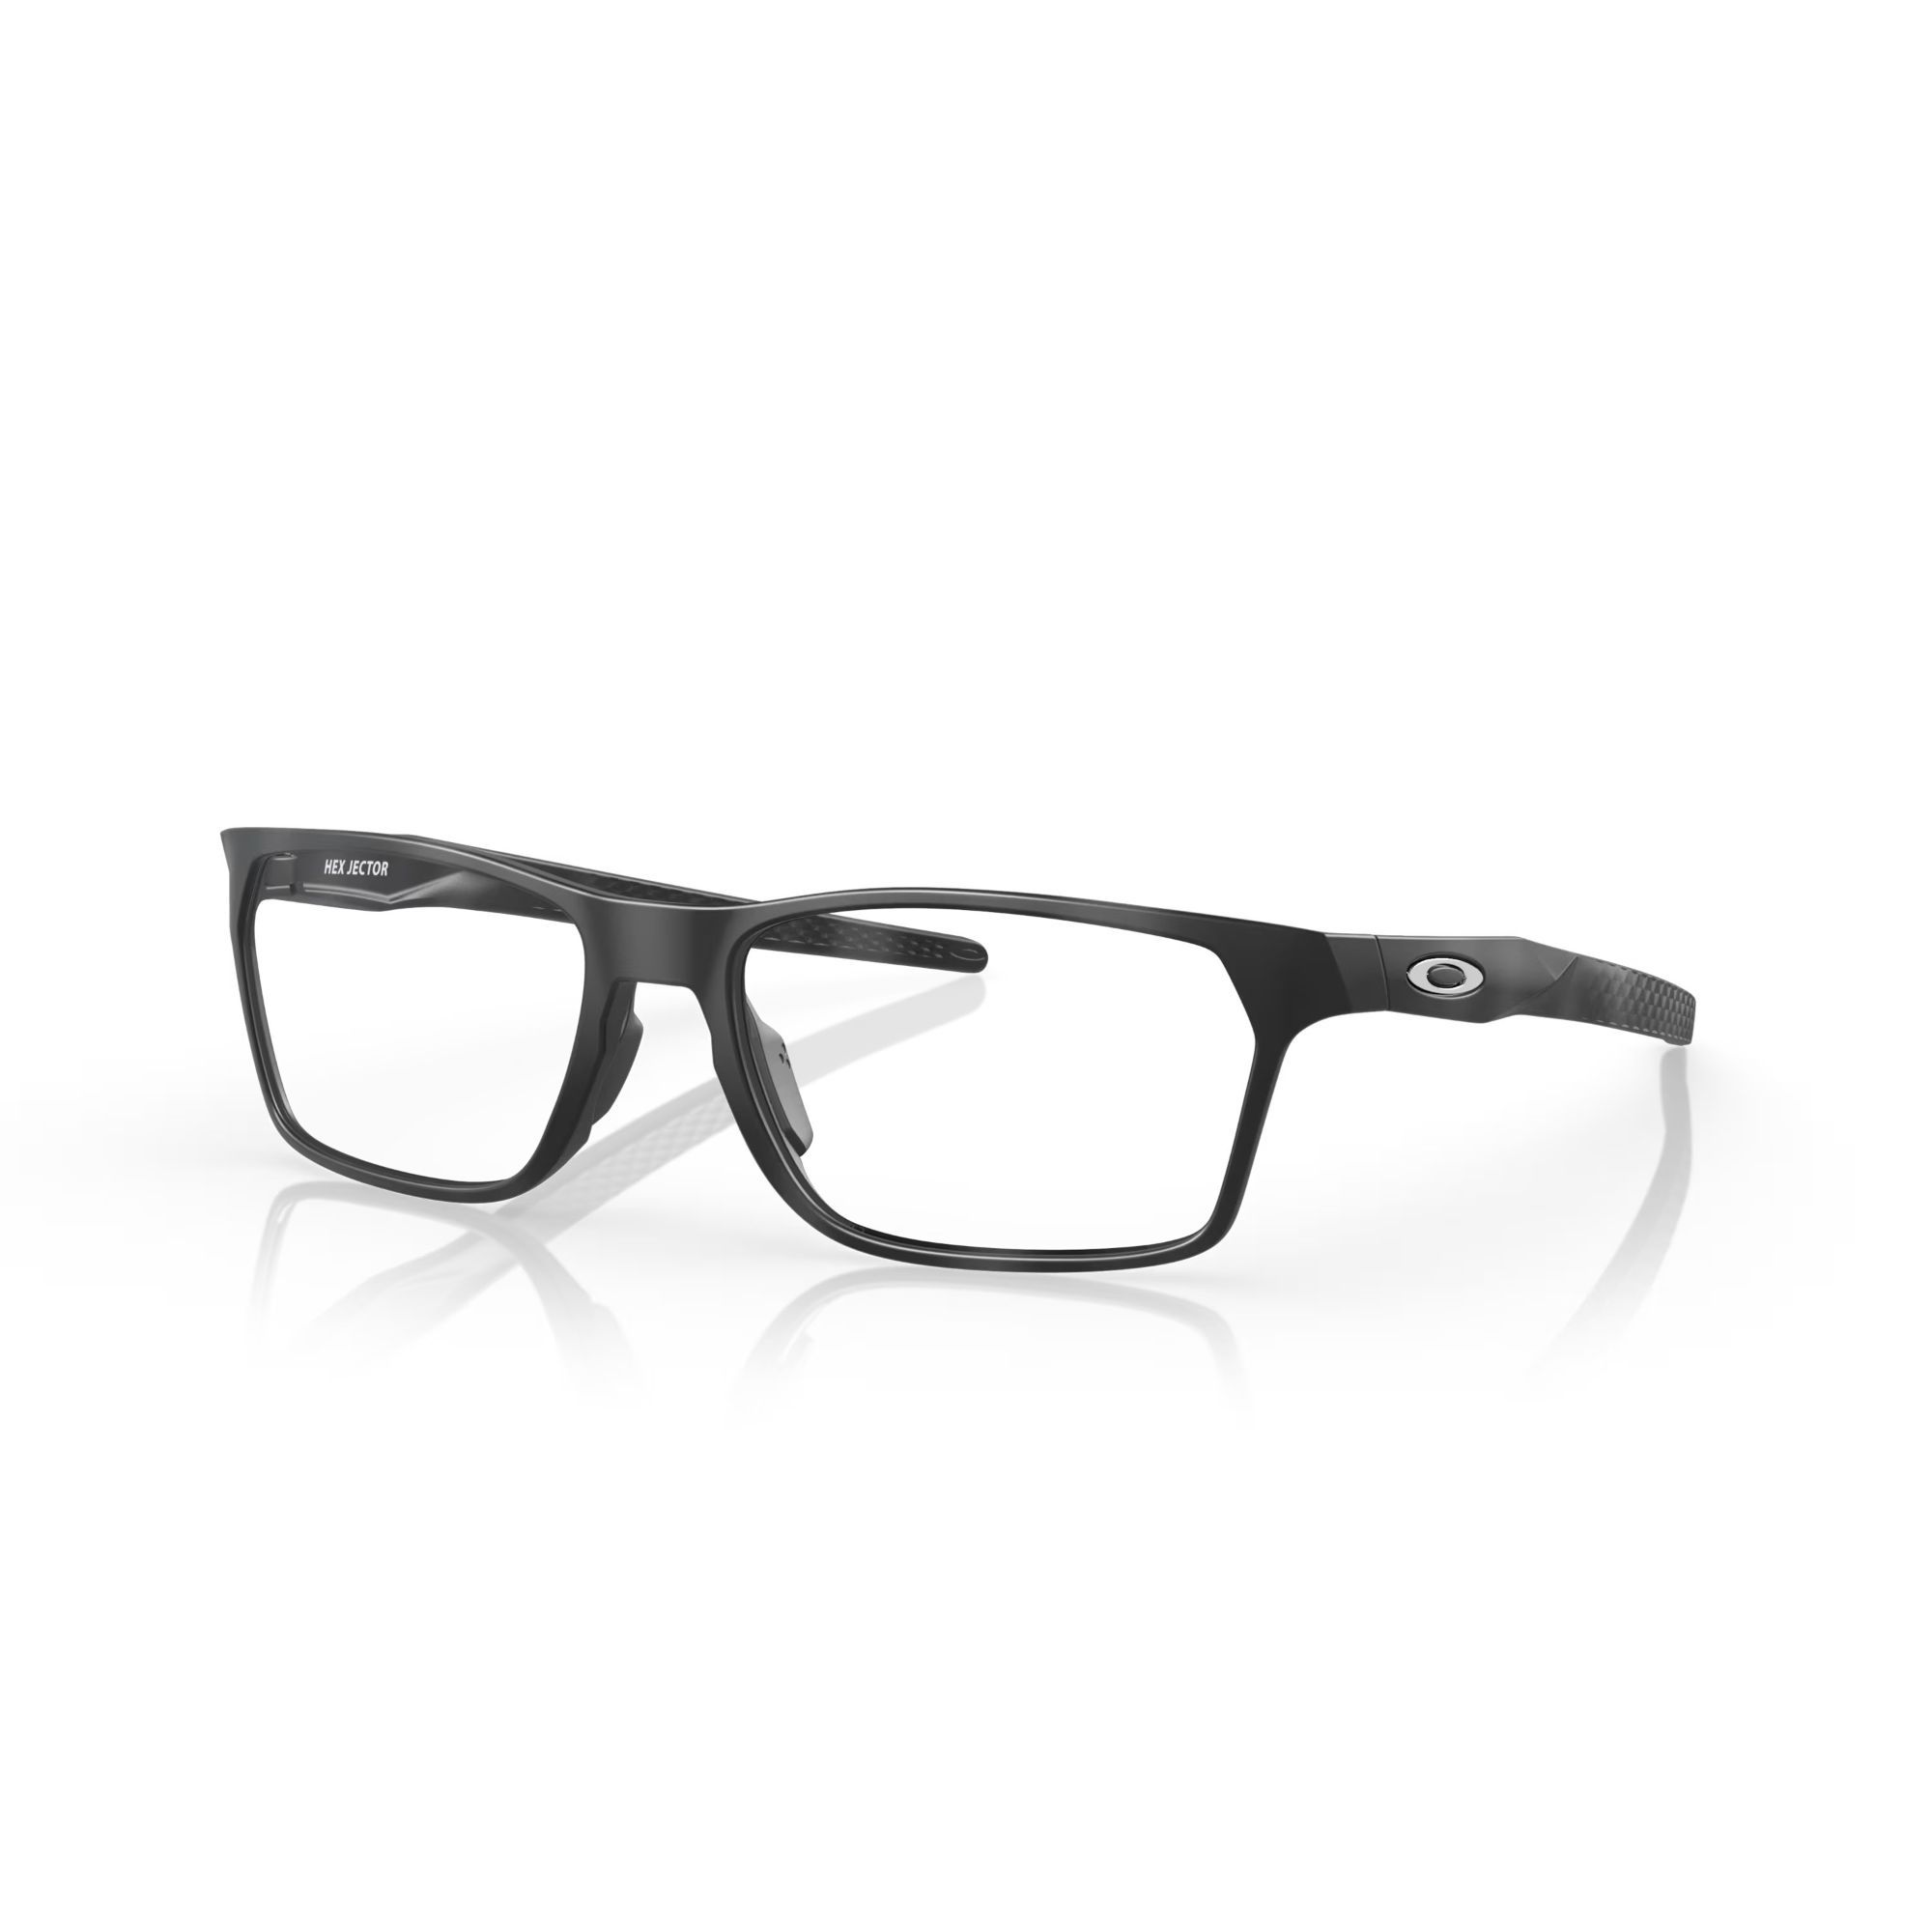 Hex Jector Eyeglasses 0OX8032-03 size 55